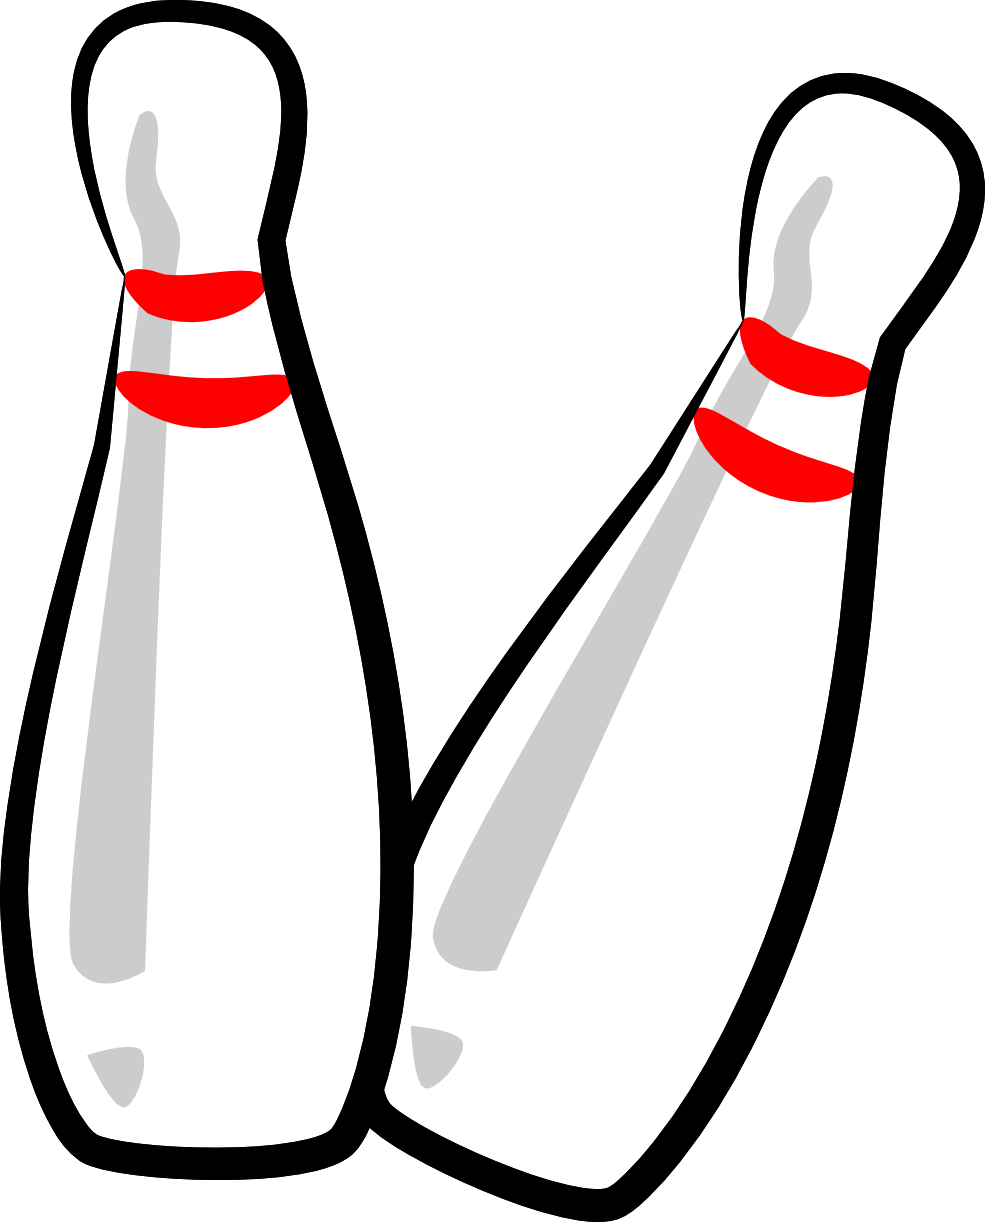 Bowling Ball And Pins - ClipArt Best